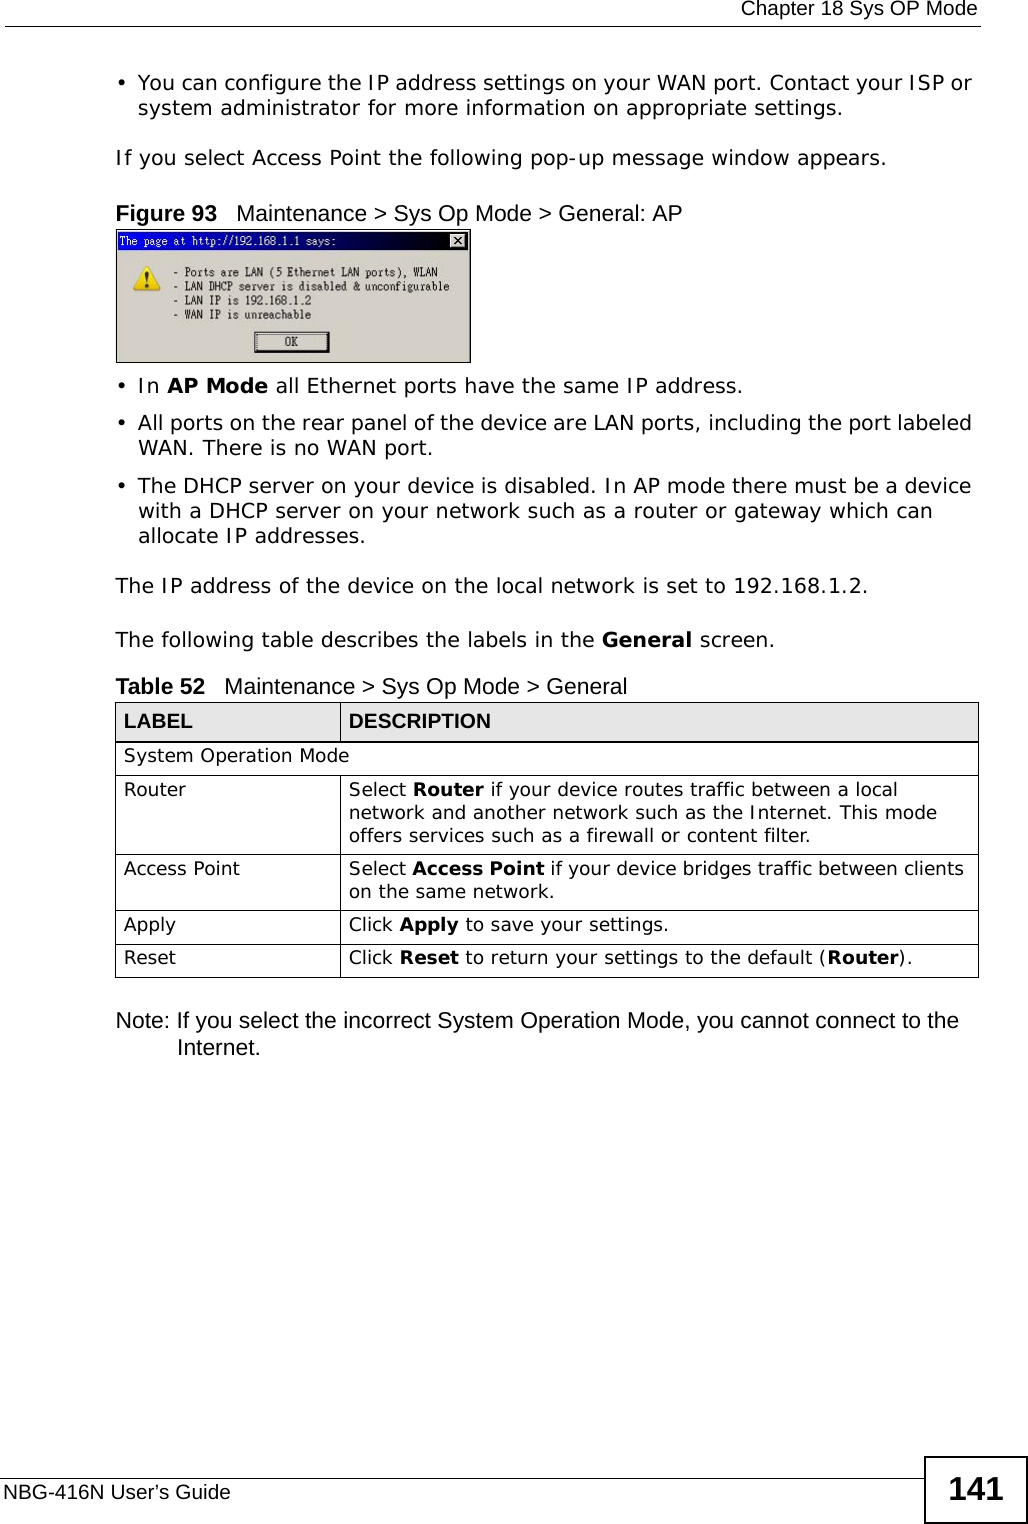  Chapter 18 Sys OP ModeNBG-416N User’s Guide 141• You can configure the IP address settings on your WAN port. Contact your ISP or system administrator for more information on appropriate settings.If you select Access Point the following pop-up message window appears.Figure 93   Maintenance &gt; Sys Op Mode &gt; General: AP •In AP Mode all Ethernet ports have the same IP address. • All ports on the rear panel of the device are LAN ports, including the port labeled WAN. There is no WAN port.• The DHCP server on your device is disabled. In AP mode there must be a device with a DHCP server on your network such as a router or gateway which can allocate IP addresses.The IP address of the device on the local network is set to 192.168.1.2.The following table describes the labels in the General screen.Note: If you select the incorrect System Operation Mode, you cannot connect to the Internet.Table 52   Maintenance &gt; Sys Op Mode &gt; GeneralLABEL DESCRIPTIONSystem Operation ModeRouter  Select Router if your device routes traffic between a local network and another network such as the Internet. This mode offers services such as a firewall or content filter.Access Point Select Access Point if your device bridges traffic between clients on the same network.Apply Click Apply to save your settings.Reset Click Reset to return your settings to the default (Router).